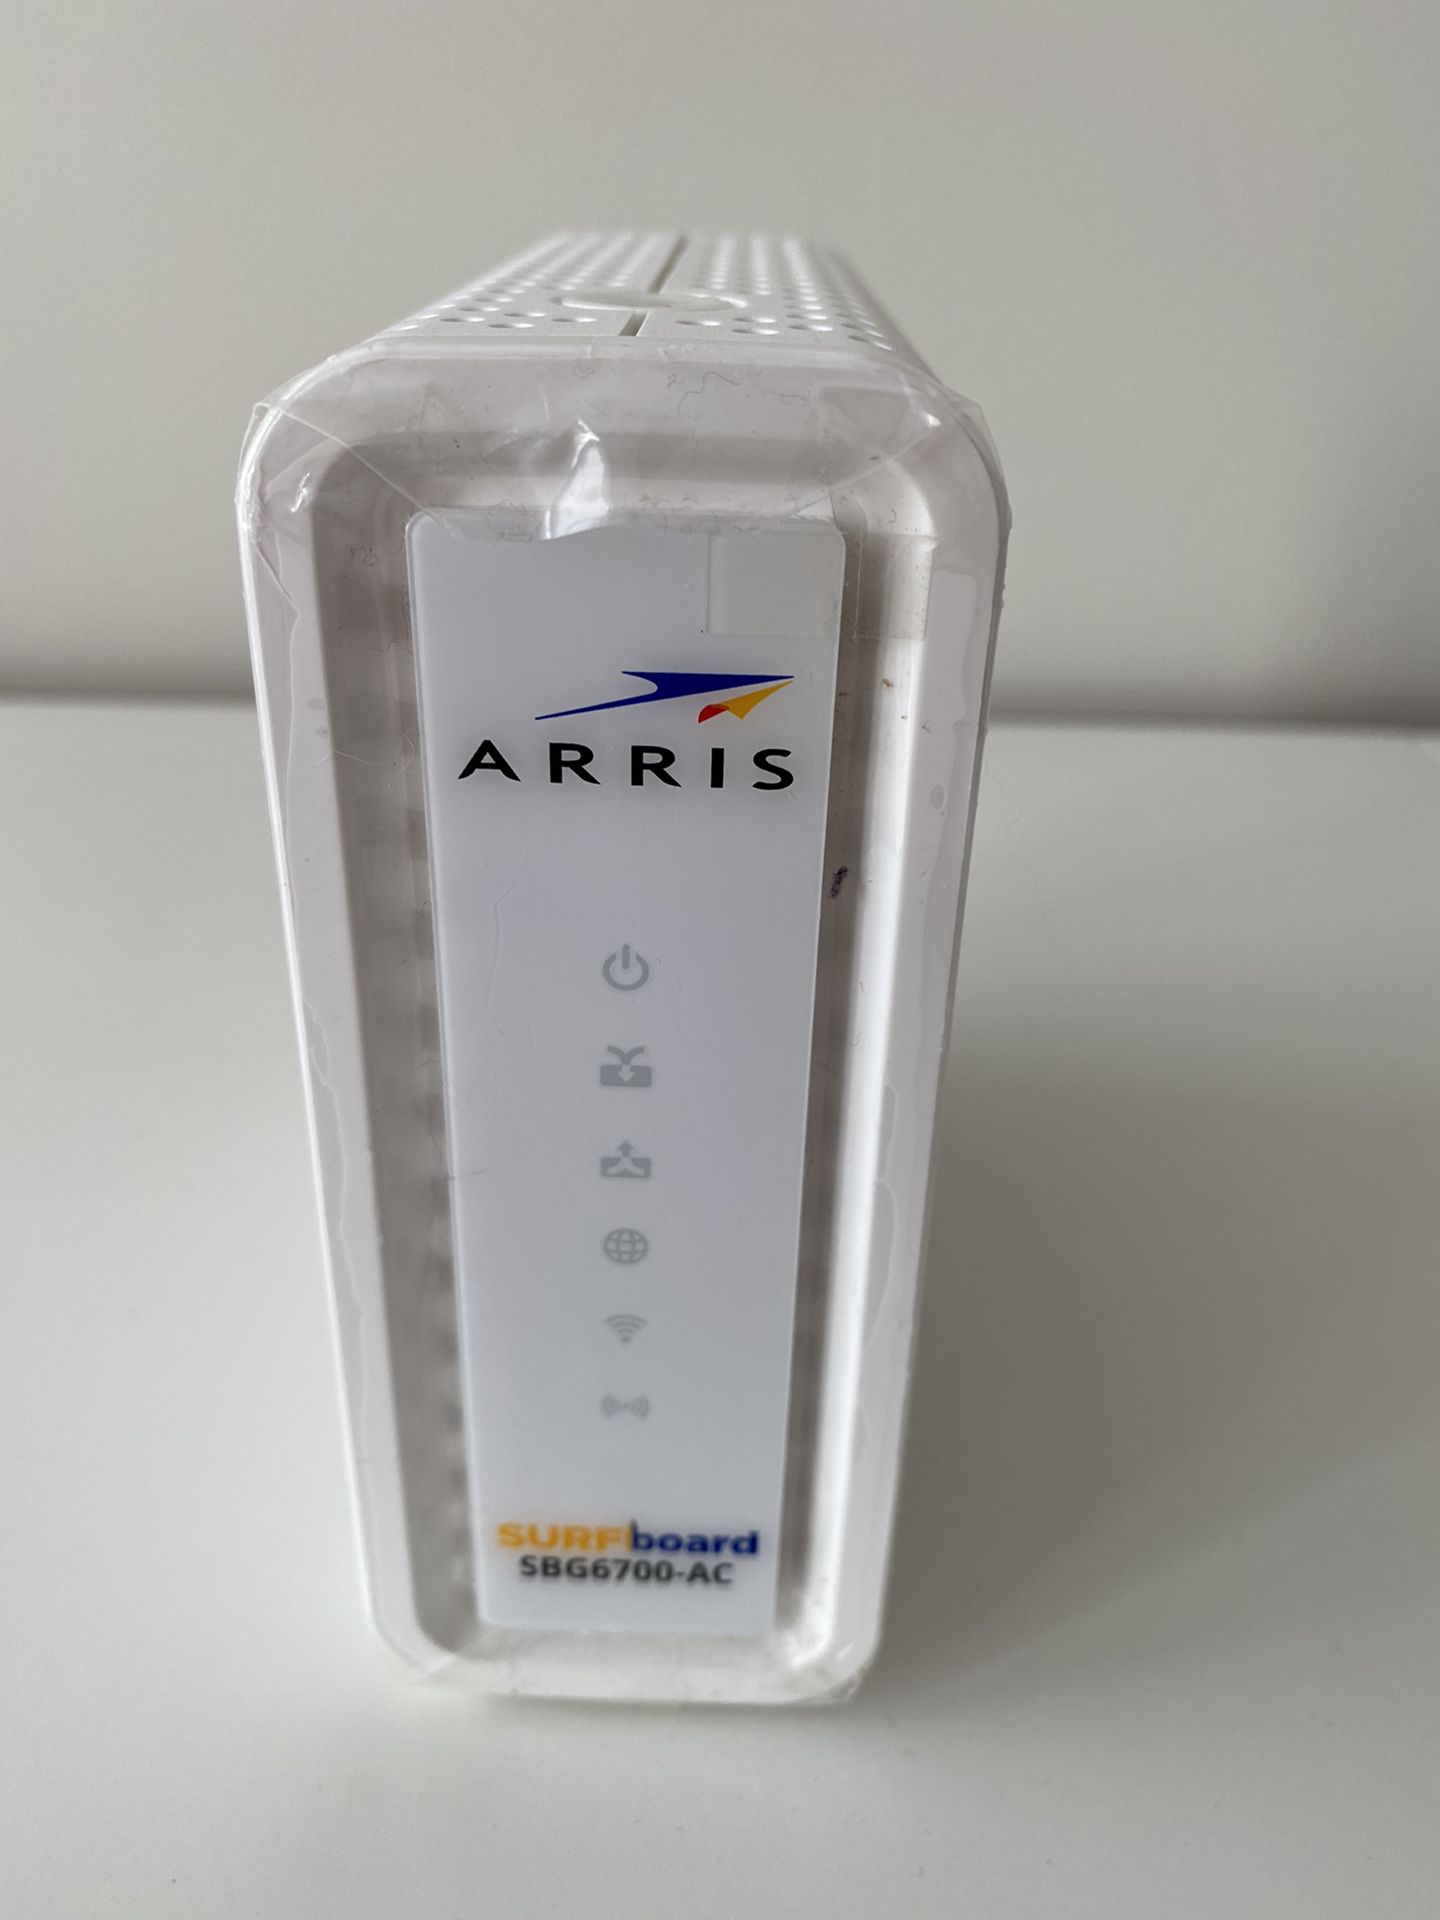 ARRIS Surfboard (8x4) Docsis 3.0 Cable Modem Plus AC1600 Dual Band Wi-Fi Router, Certified for Comcast Xfinity, Spectrum, Cox & More (SBG6700AC), Whit